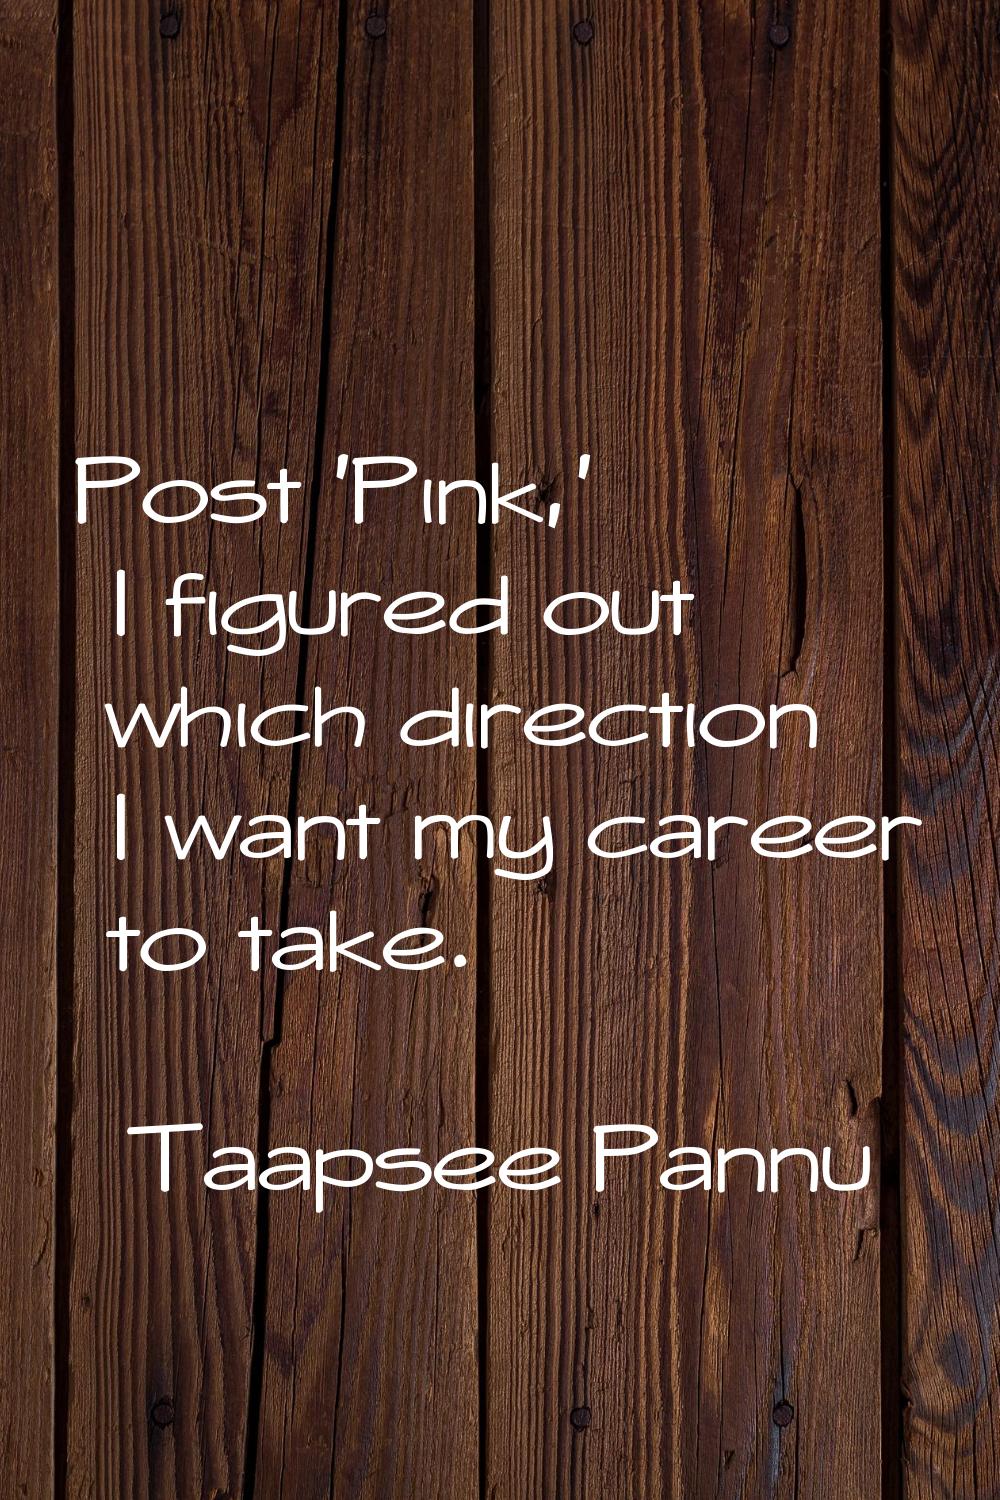 Post 'Pink,' I figured out which direction I want my career to take.